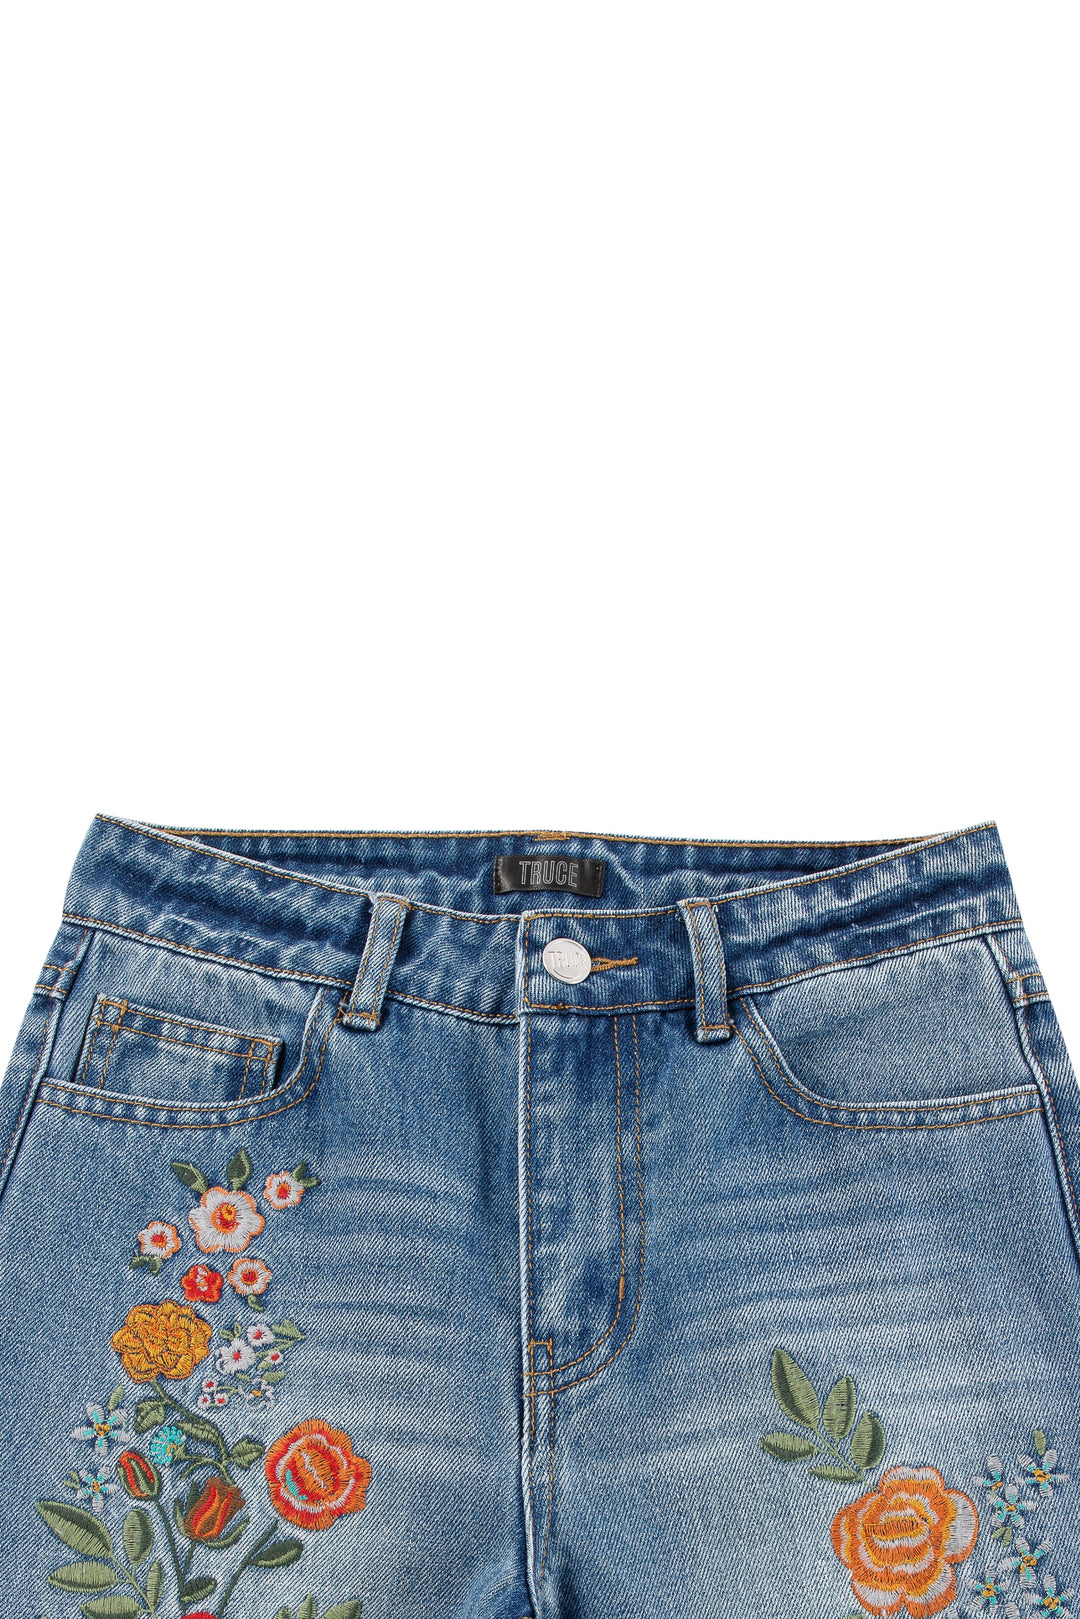 Flower Embroidered Jeans by TRUCE